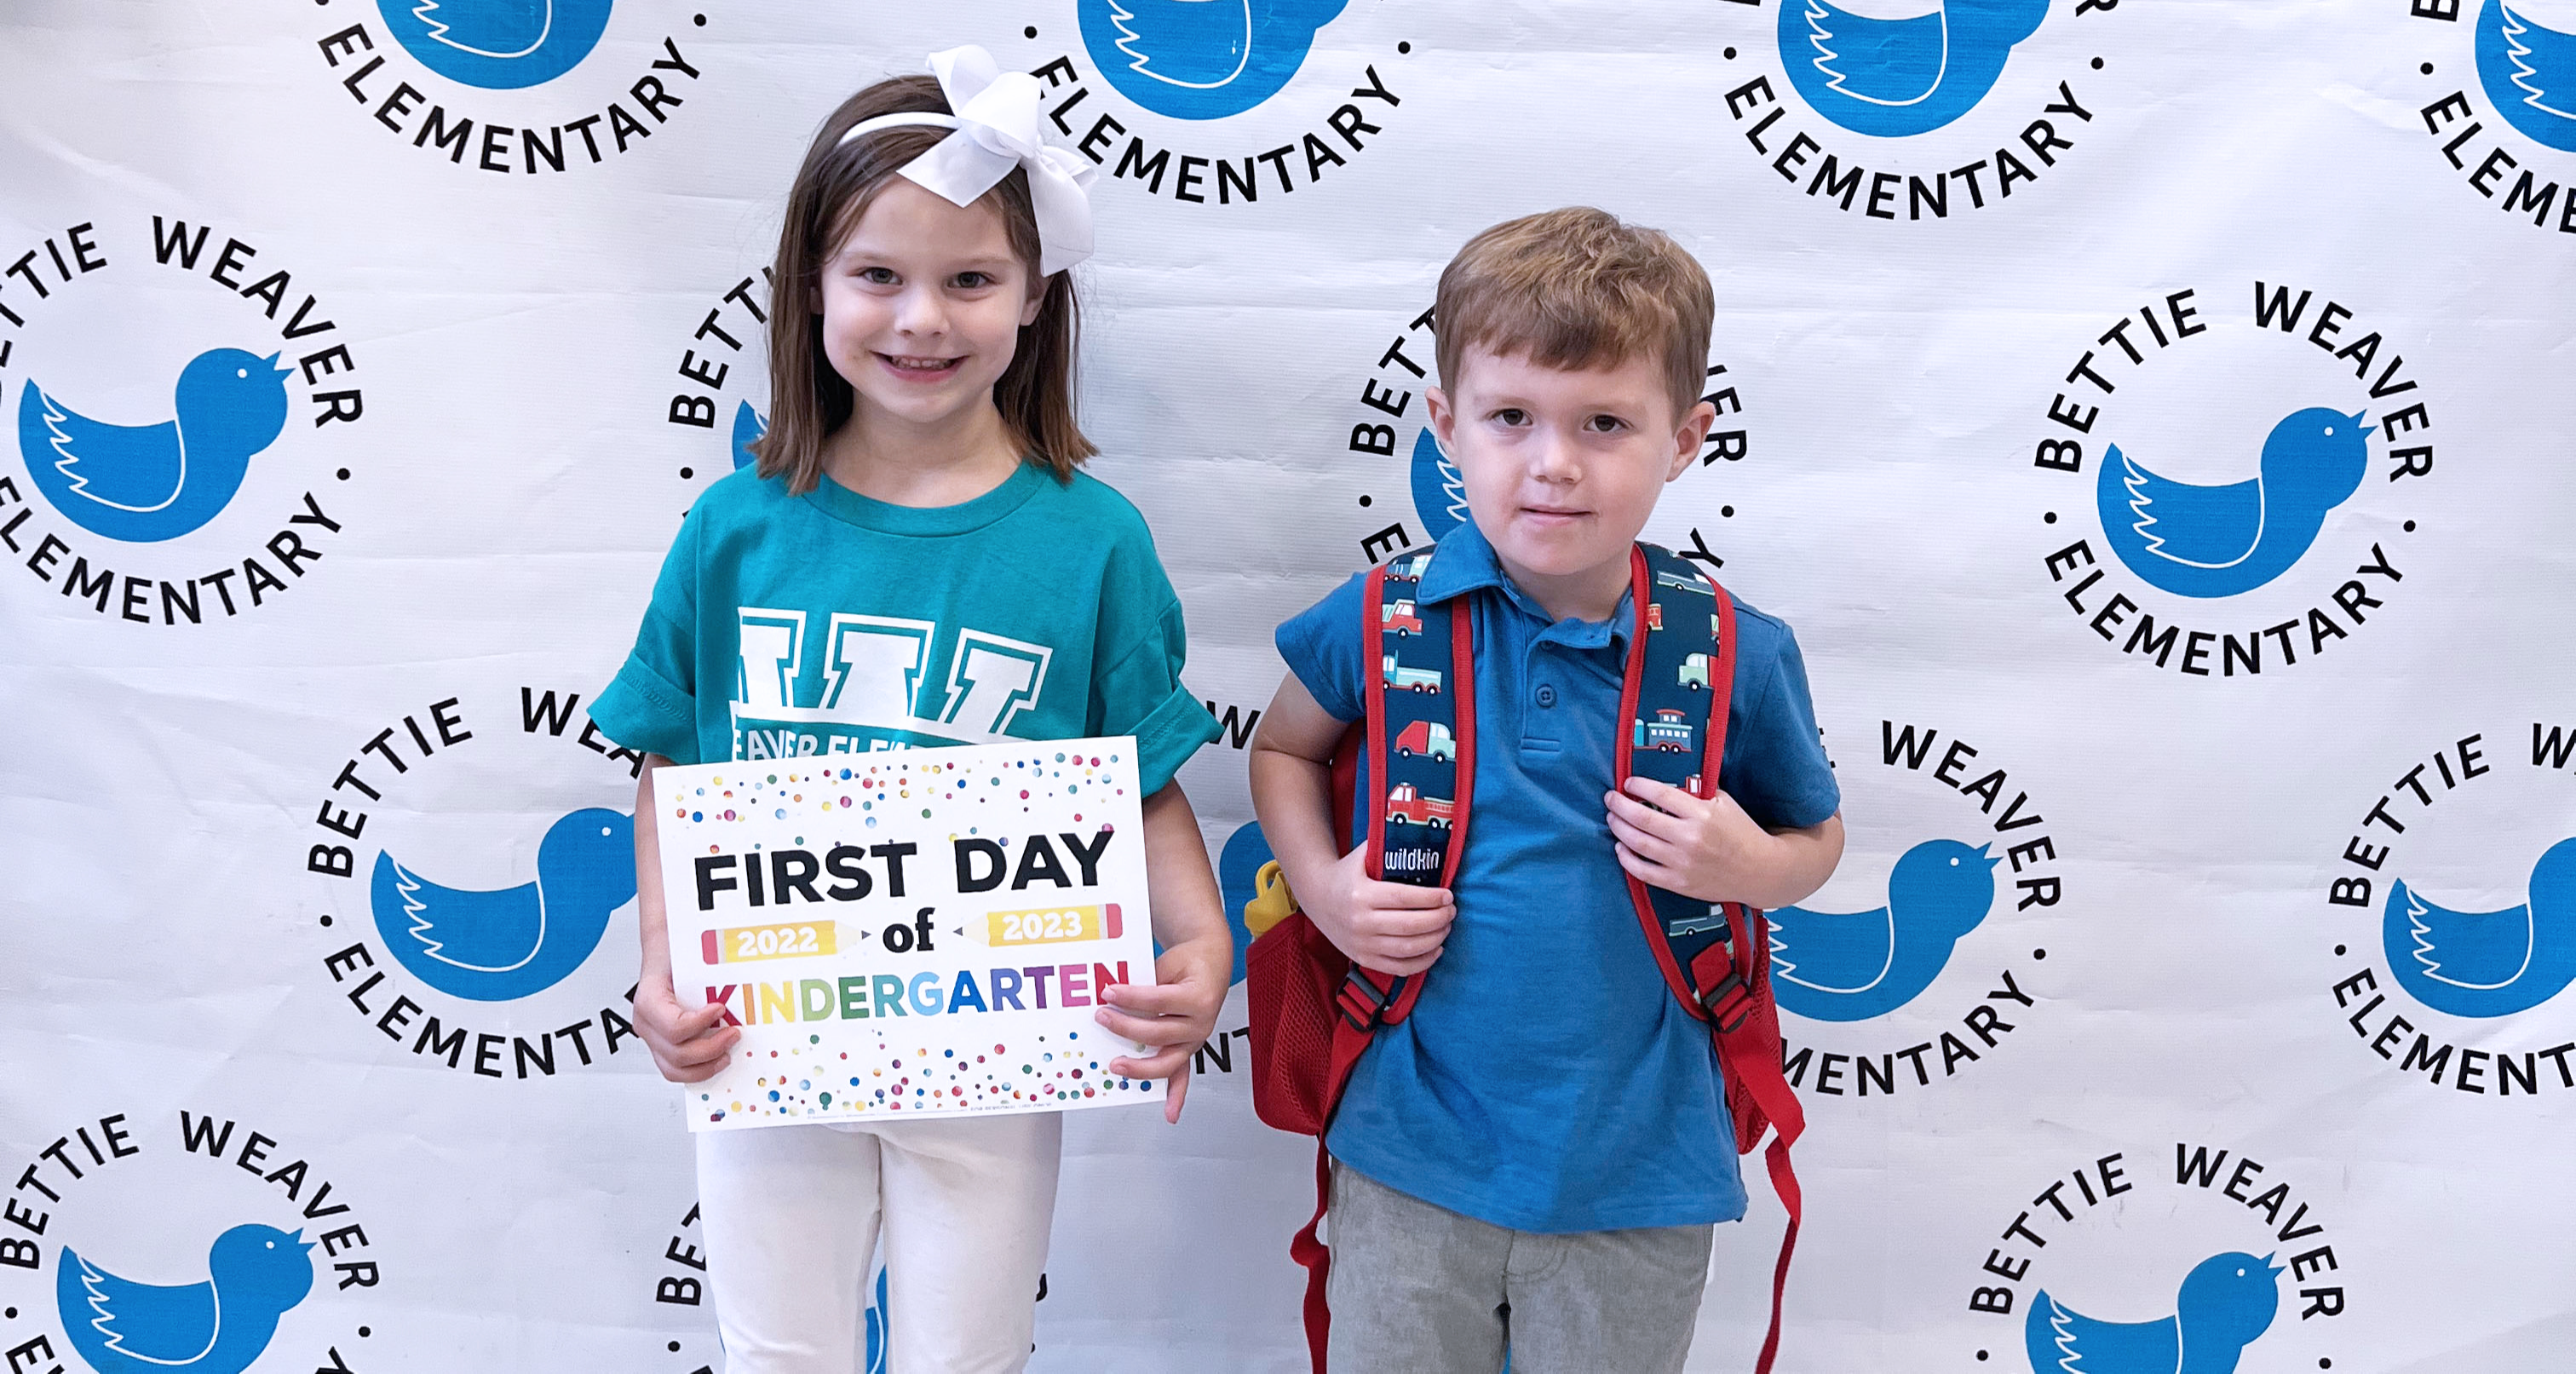 Two students in front of step and repeat wall holding first day sign.